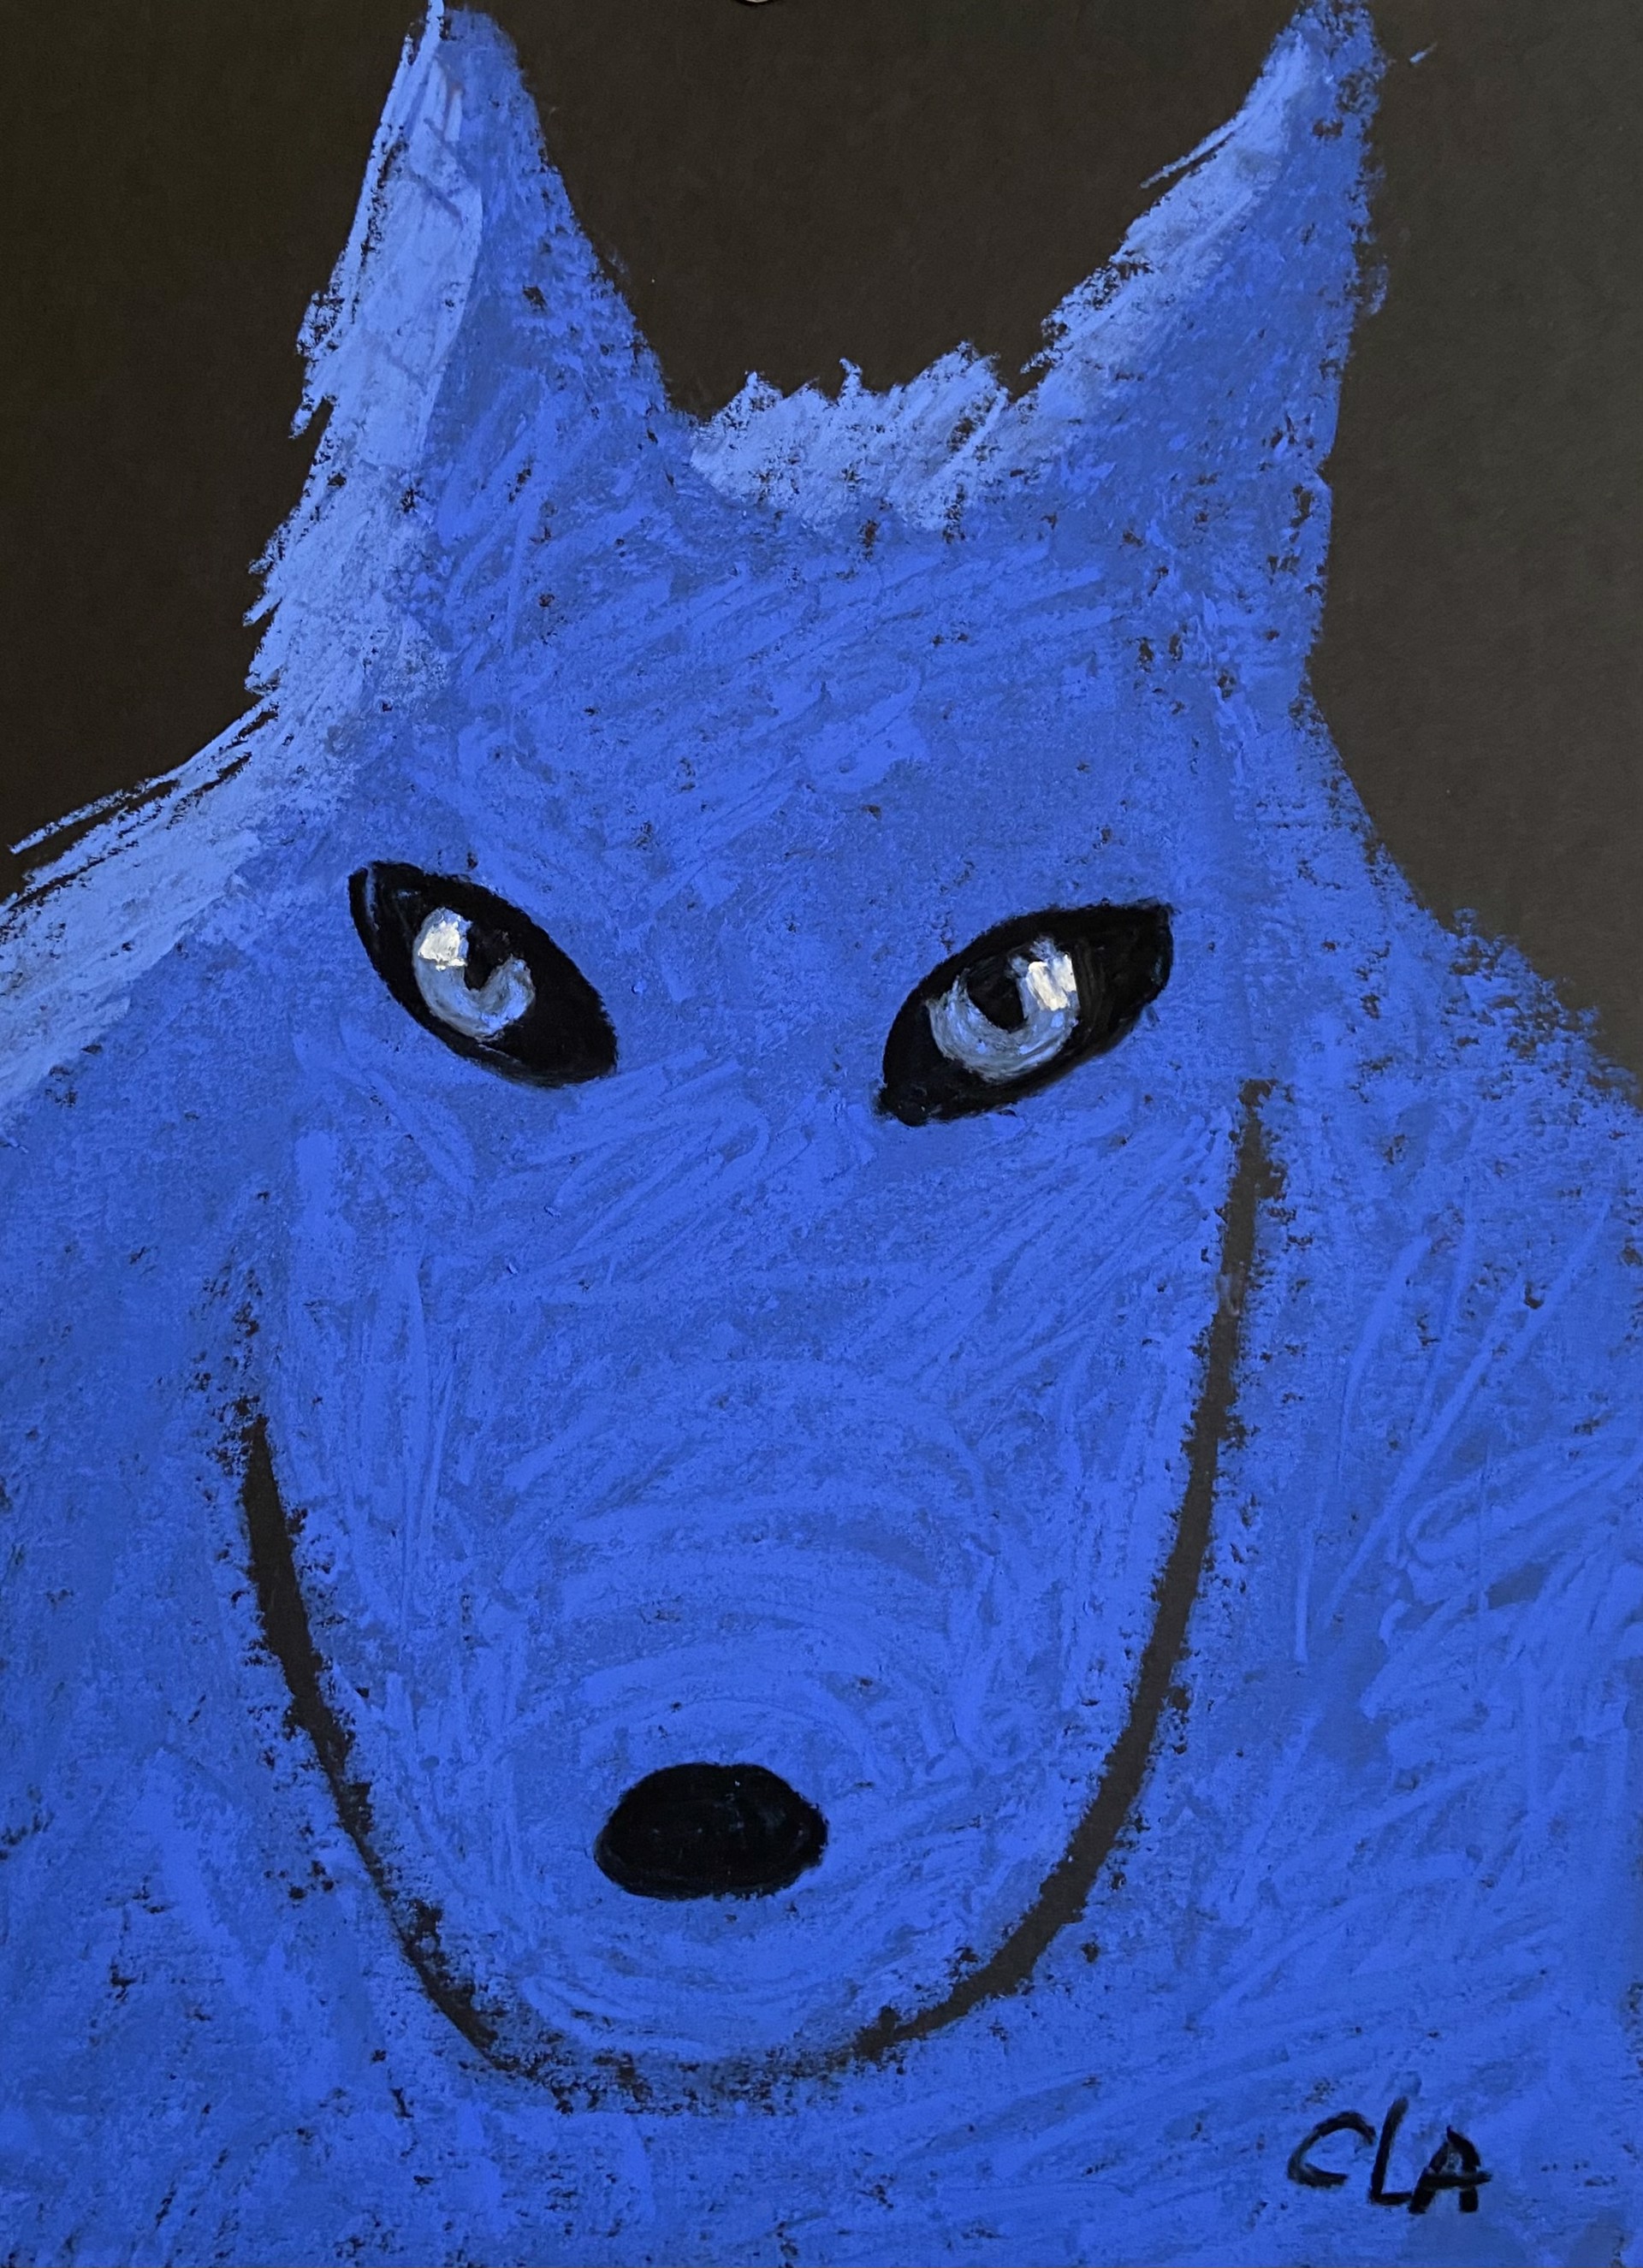 Young Wolves: Blue Boy by Carole LaRoche